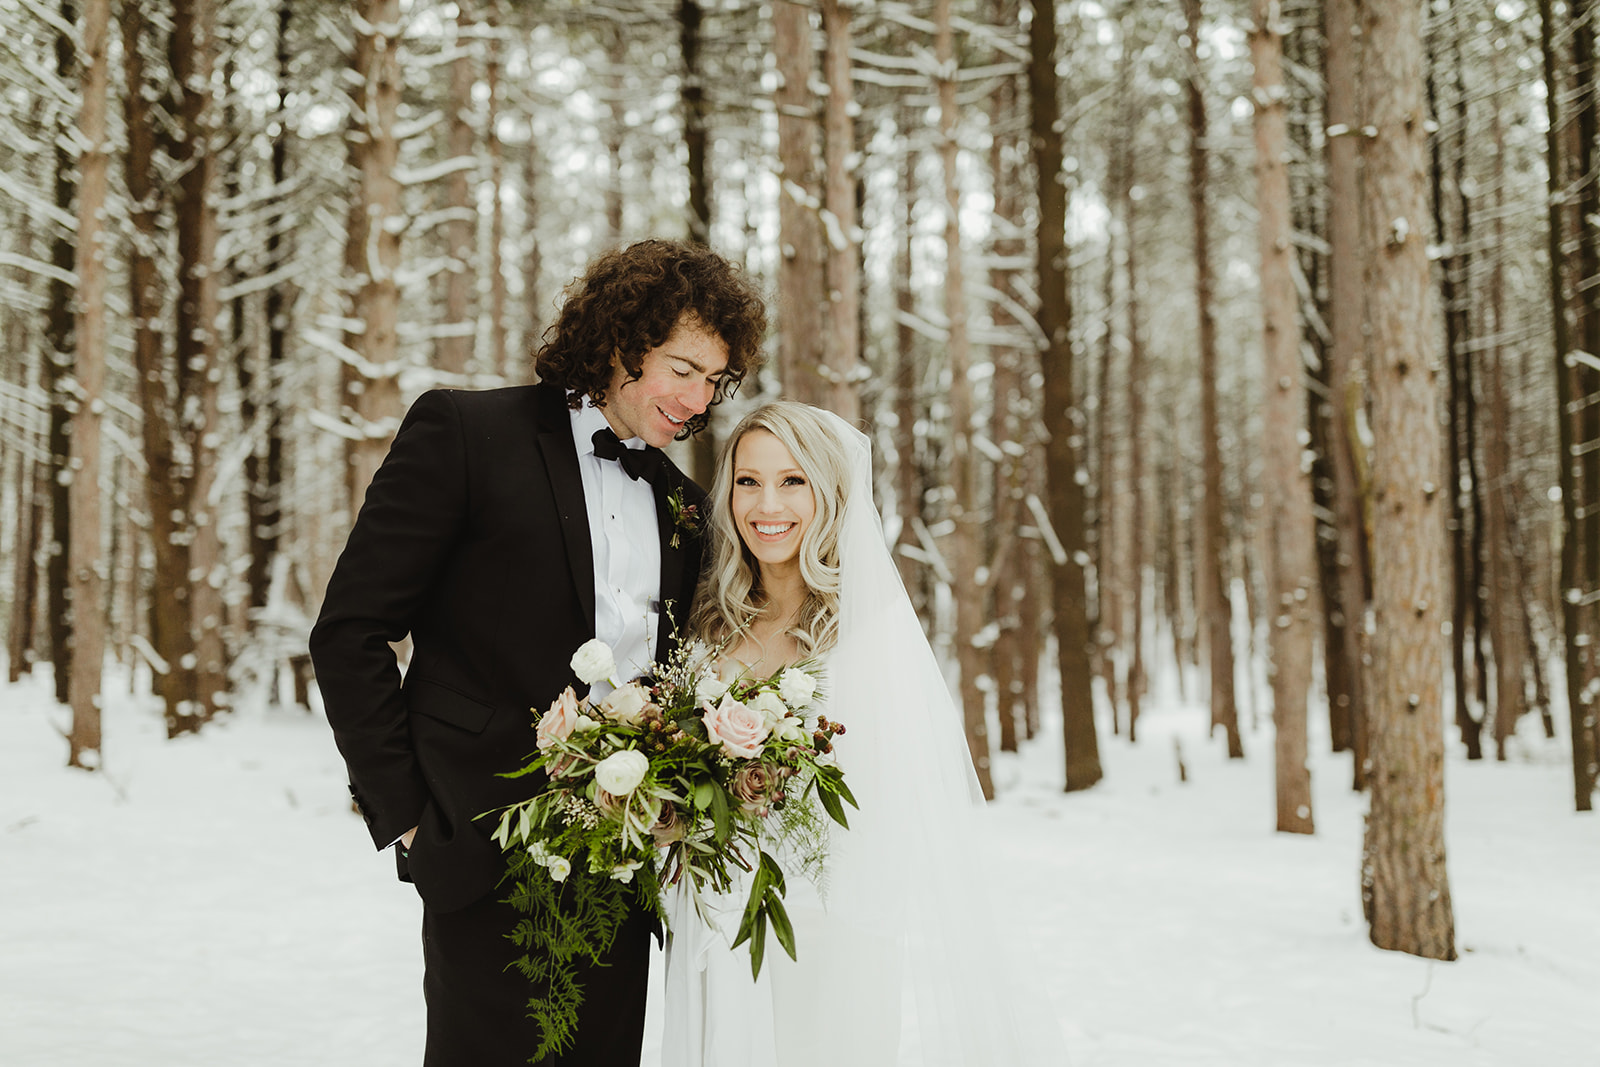 A bride smiling in the snowy woods after her Grand Rapids, Michigan wedding